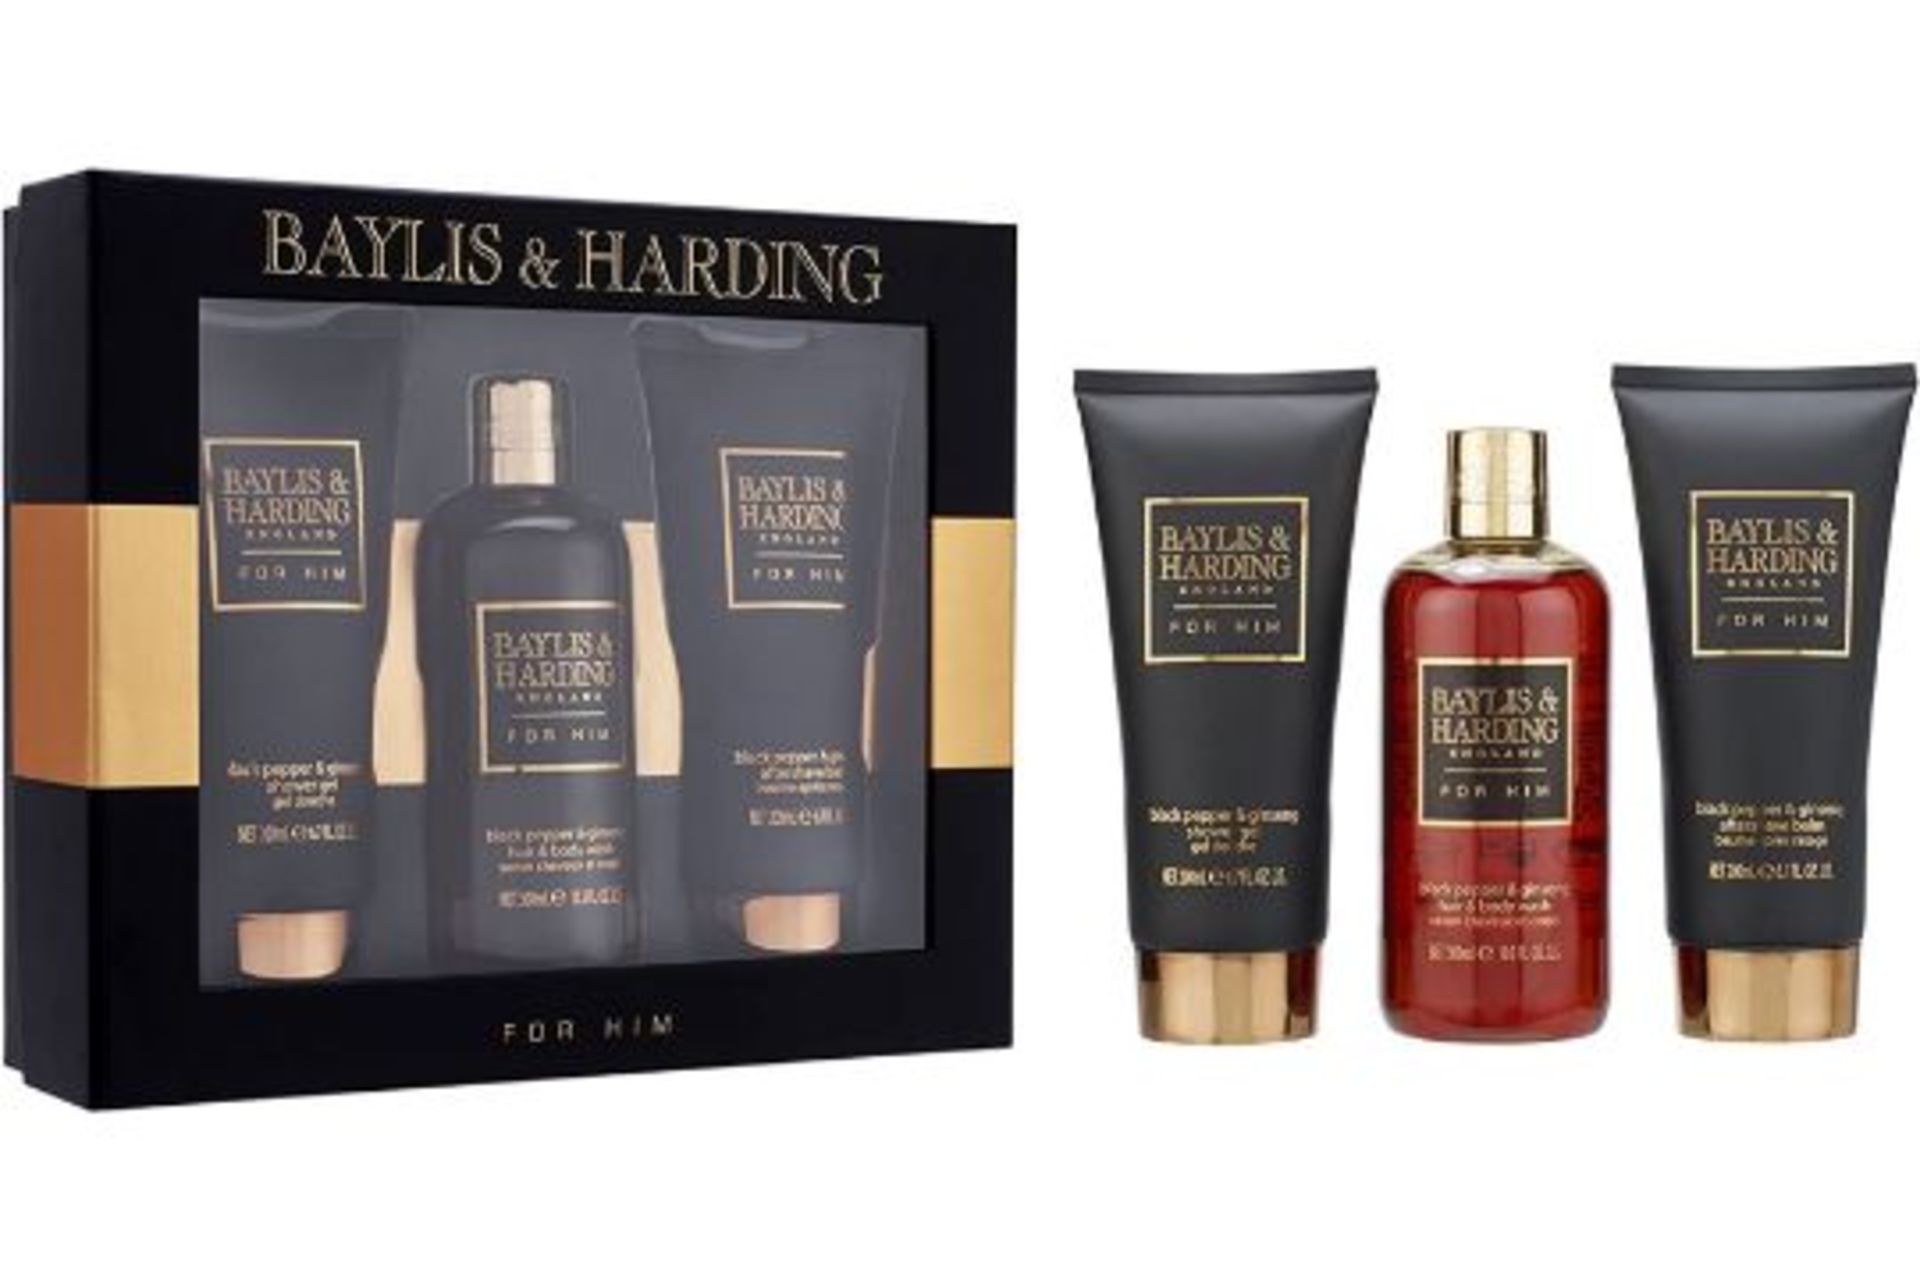 BRAND NEW BAYLIS & HARDING GROOMING TRIO, BLACK PEPPER AND GINSENG GIFT SET